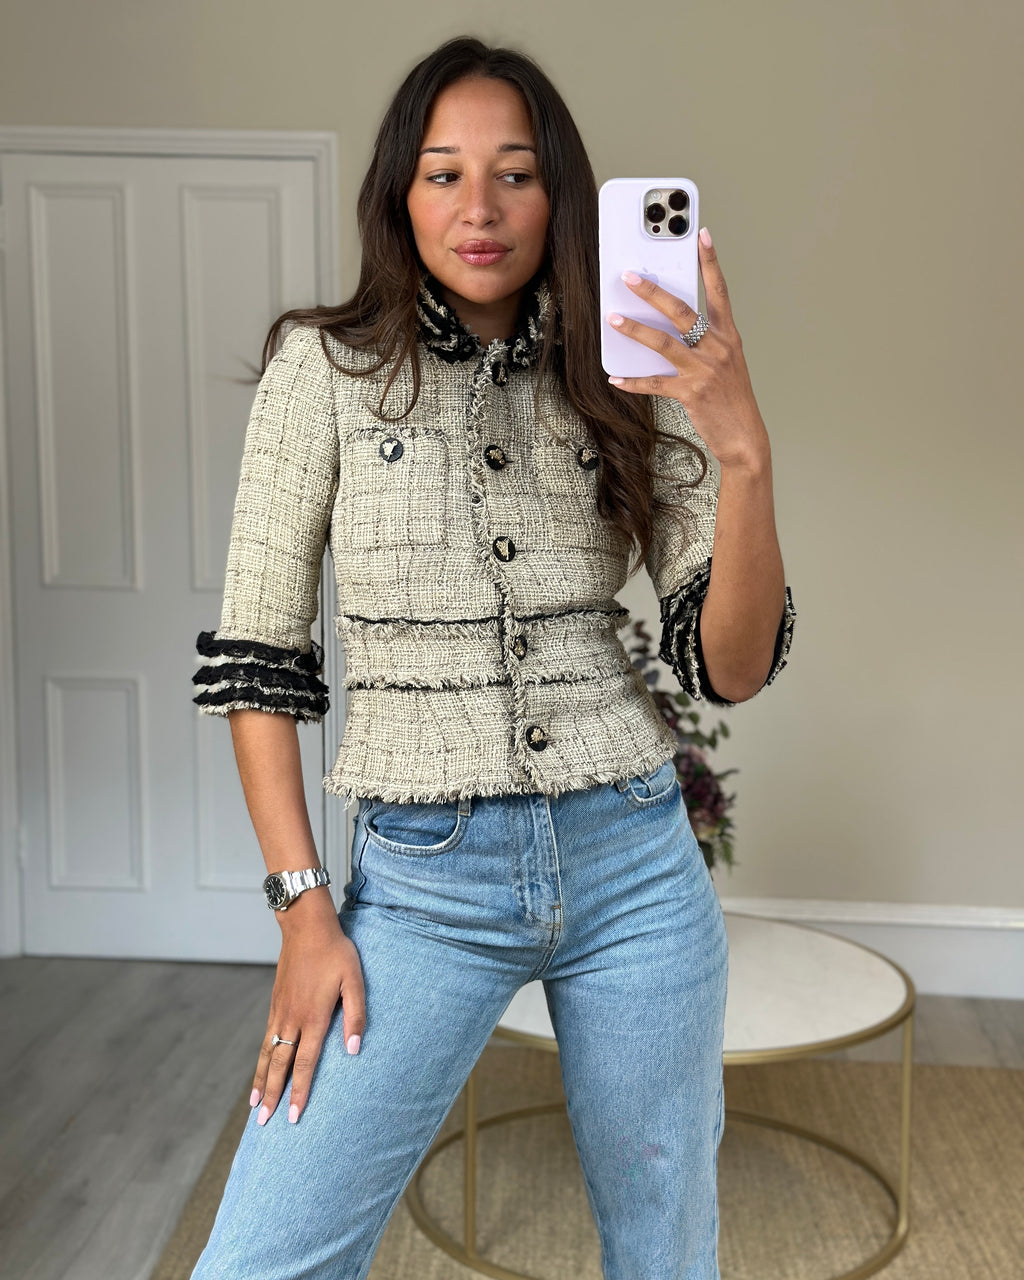 The Chic Jacket French Girl Closet Staples  wit  whimsy